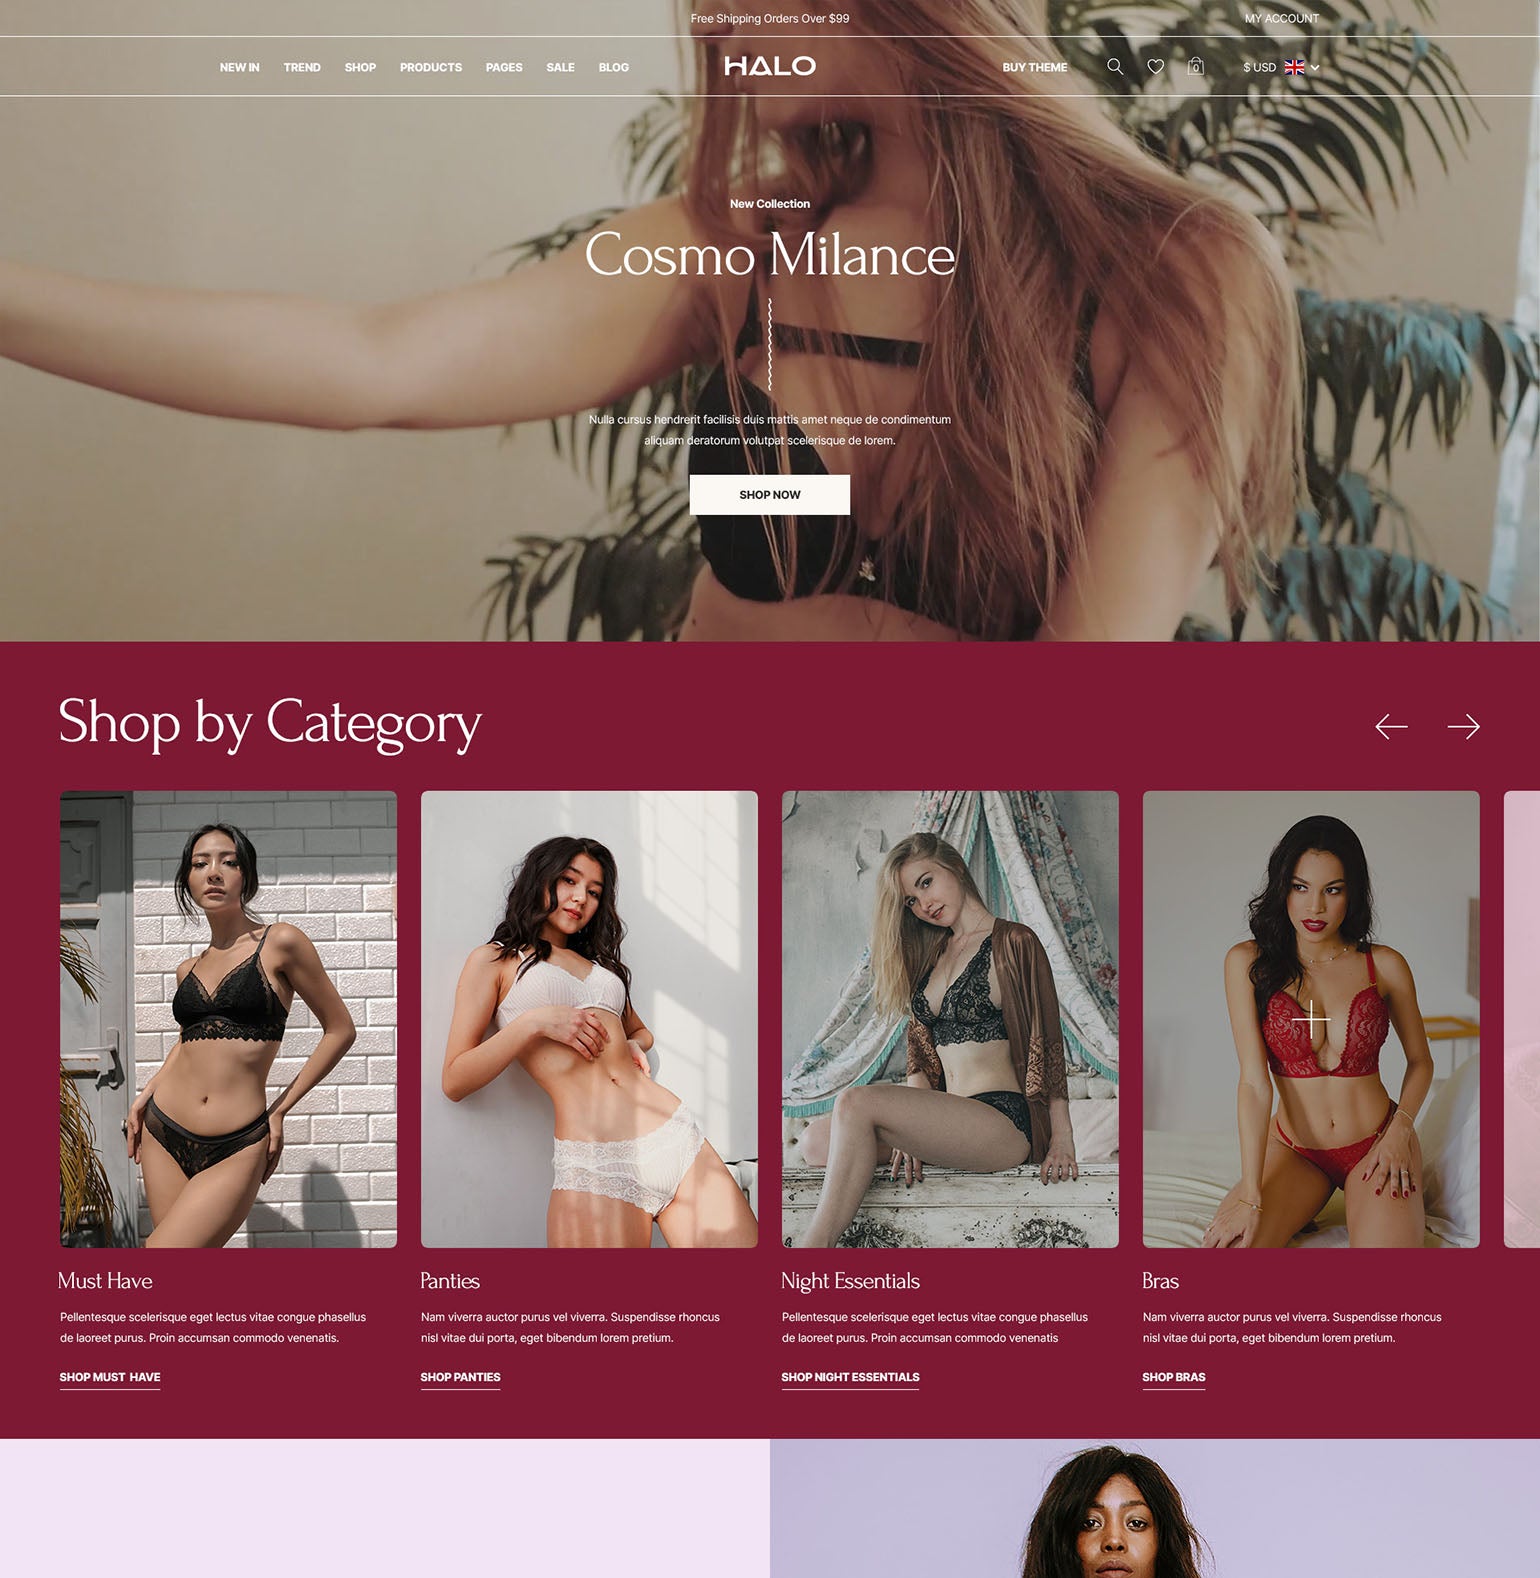 Halo Theme - Lingerie & Accessories Ecommerce Website Template